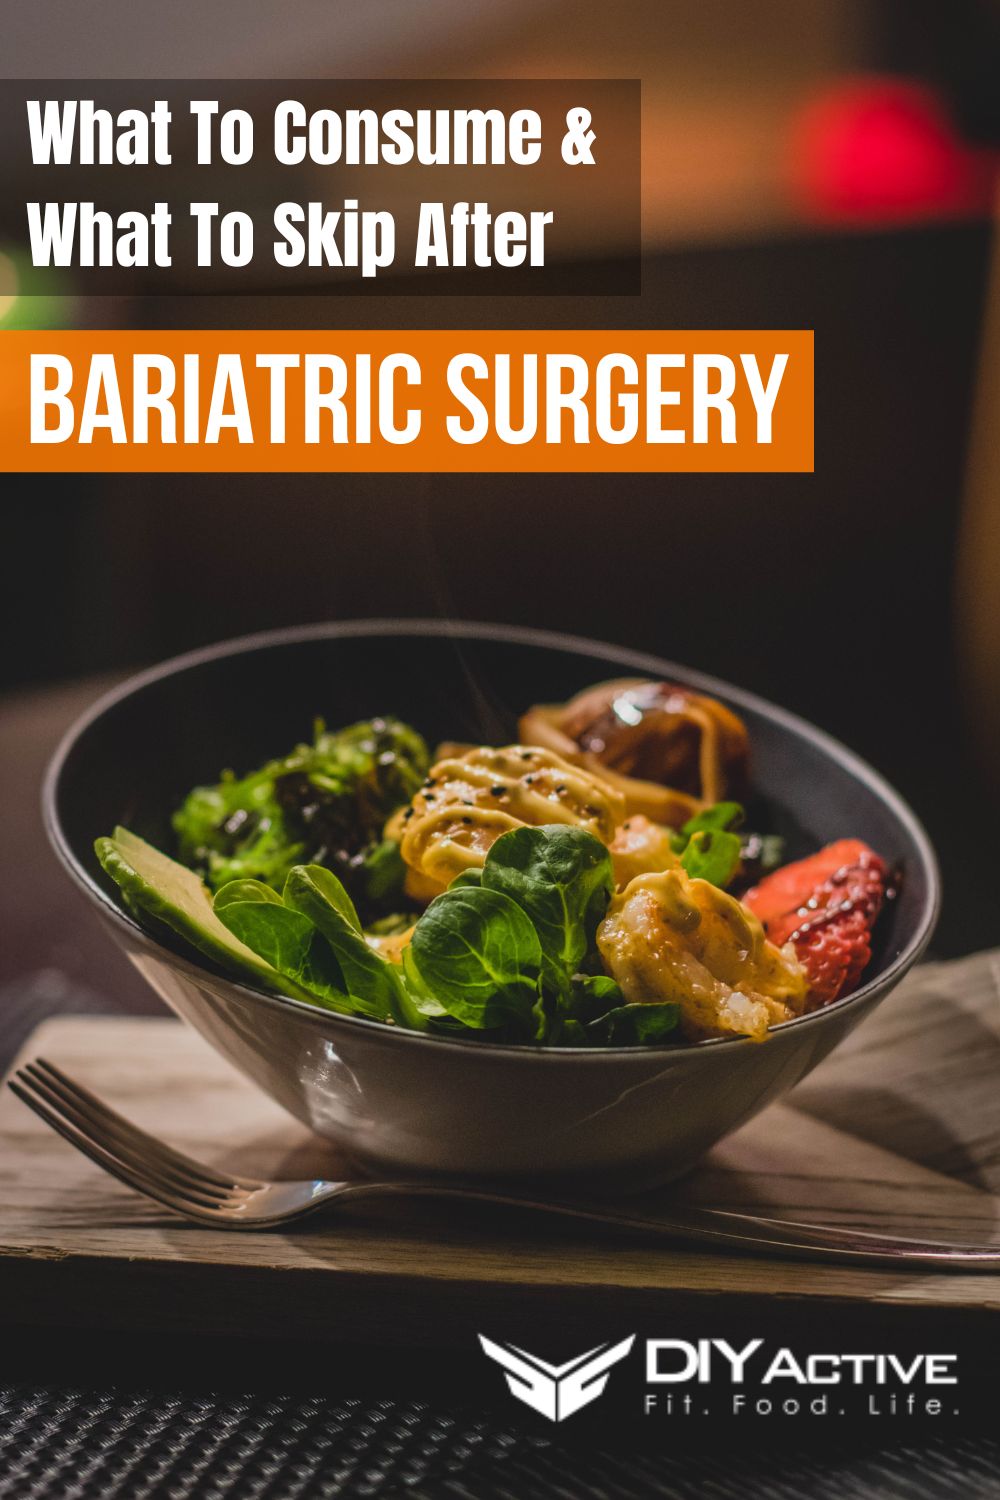 Meal Planning After Bariatric Surgery: What To Consume & What To Skip